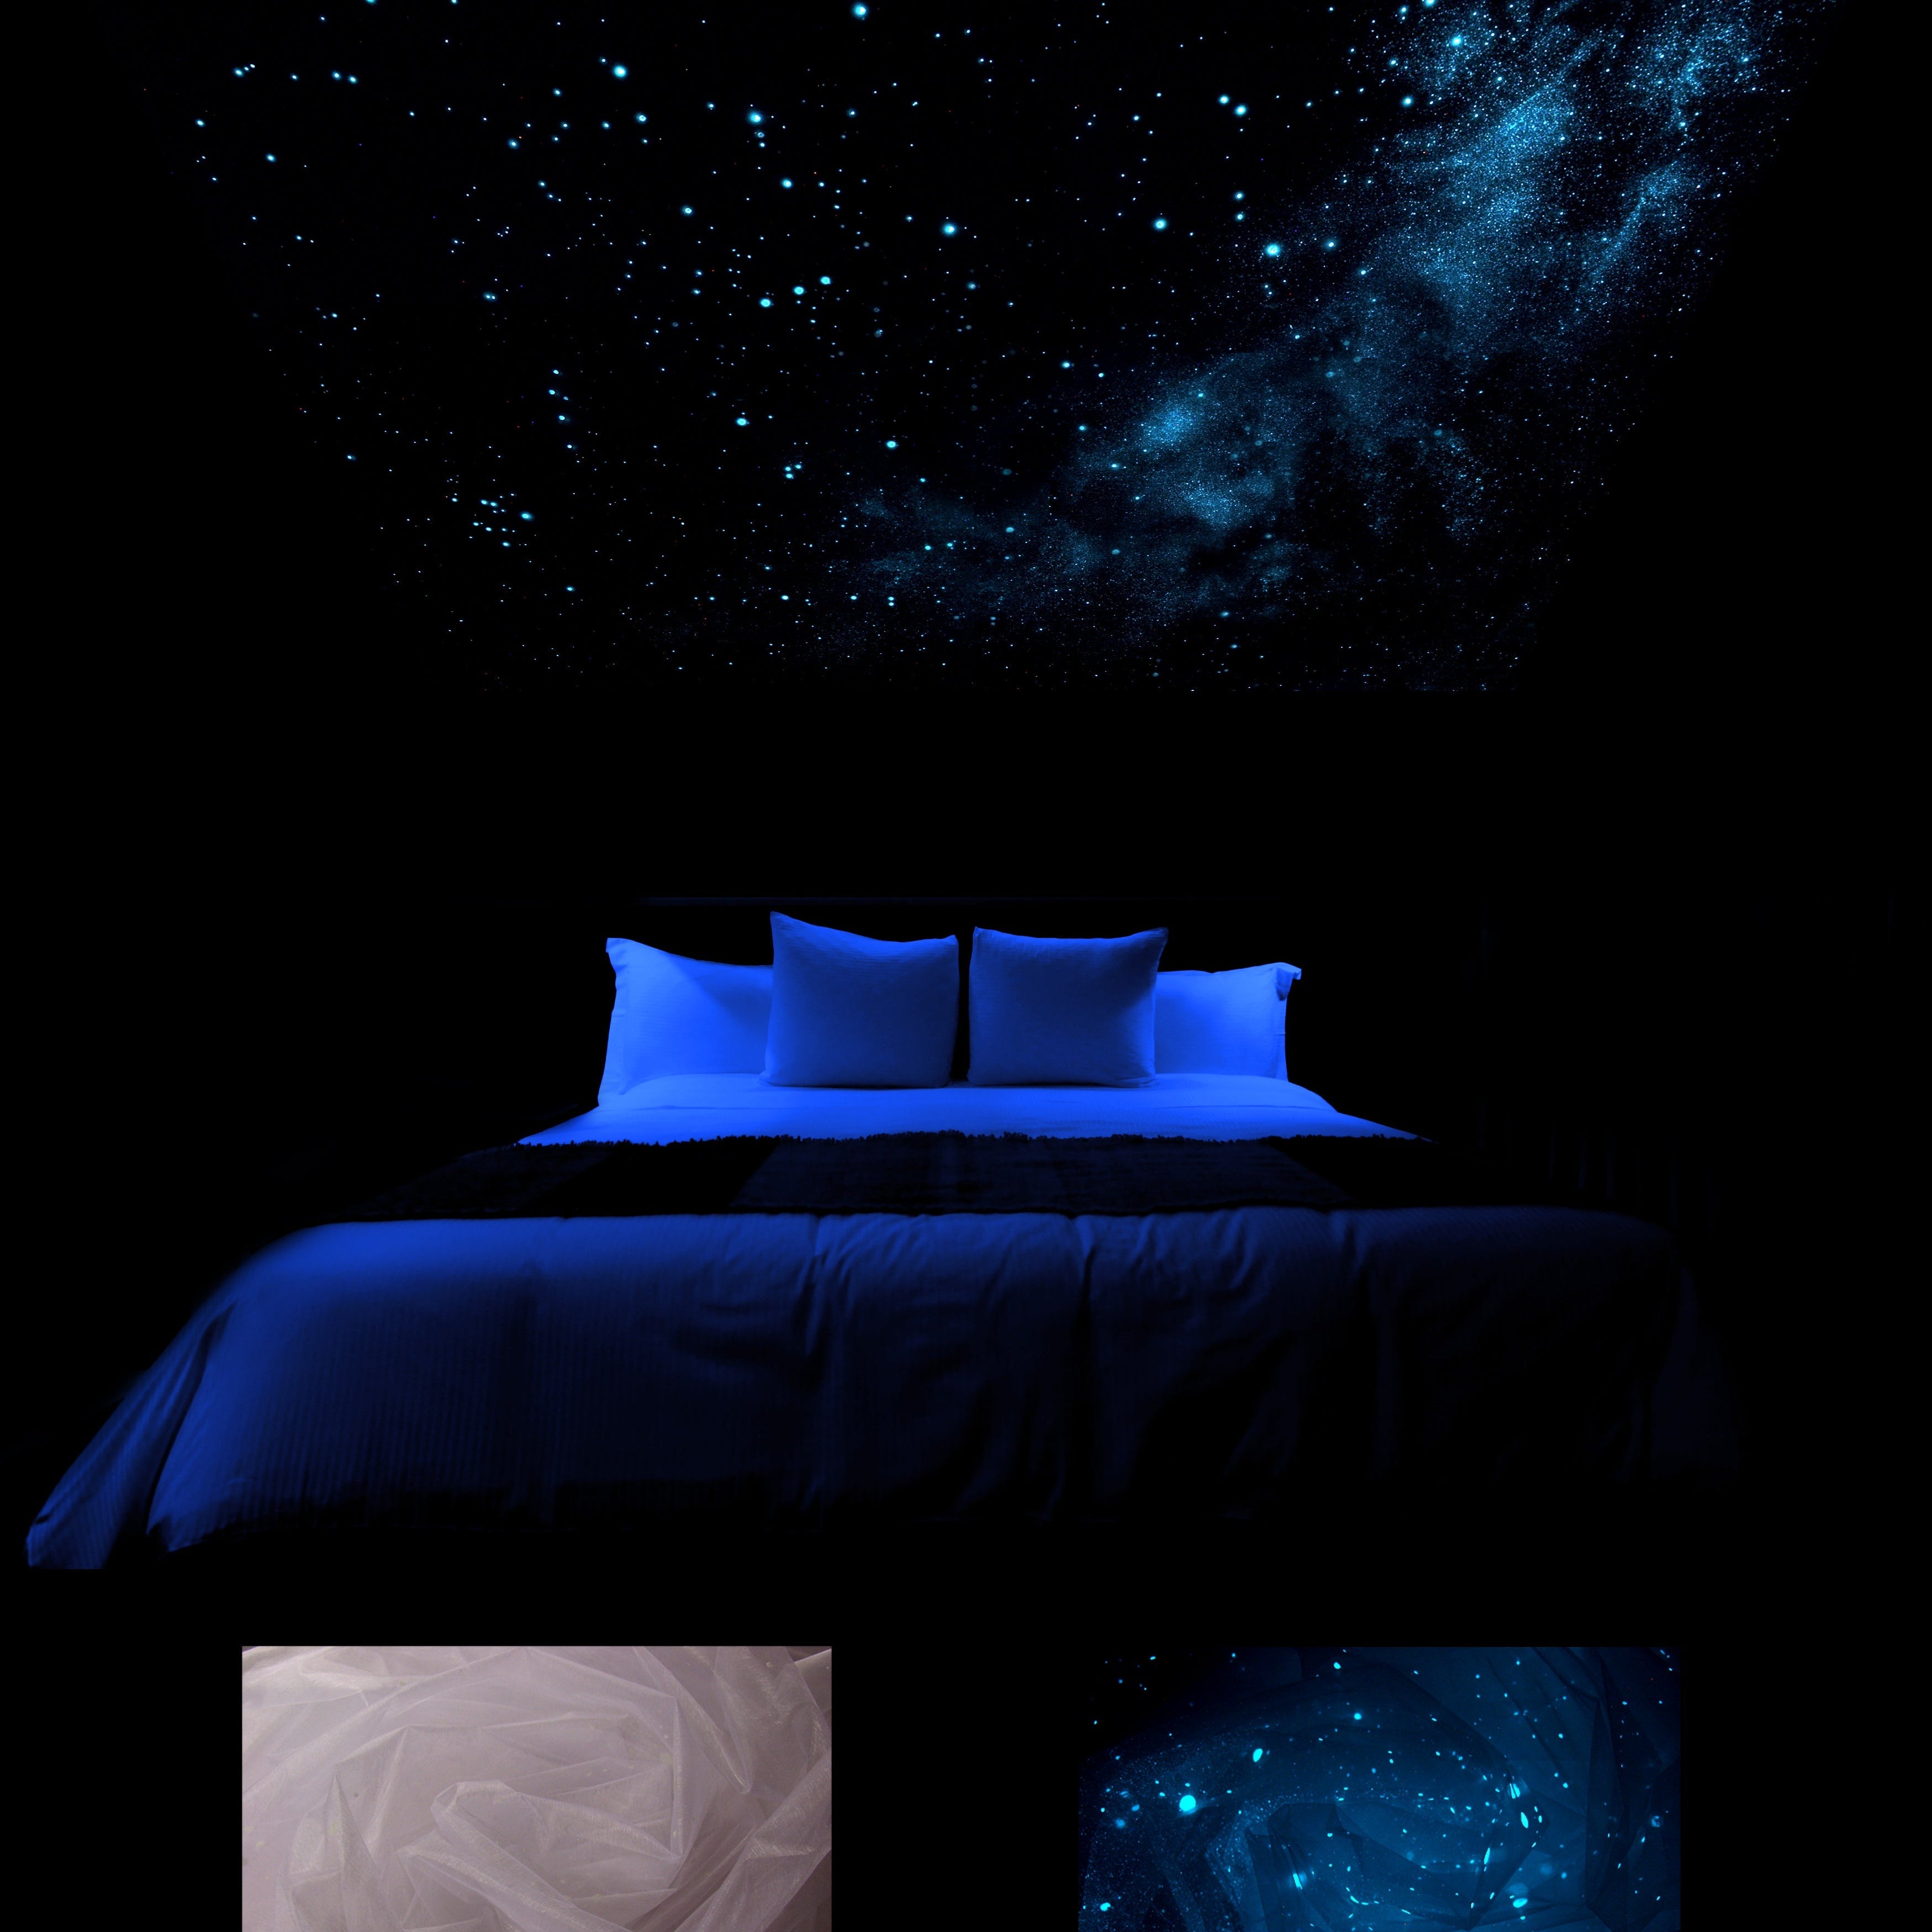 glow in the dark inspirational tapestry, blues and stars, glows like the real night sky.